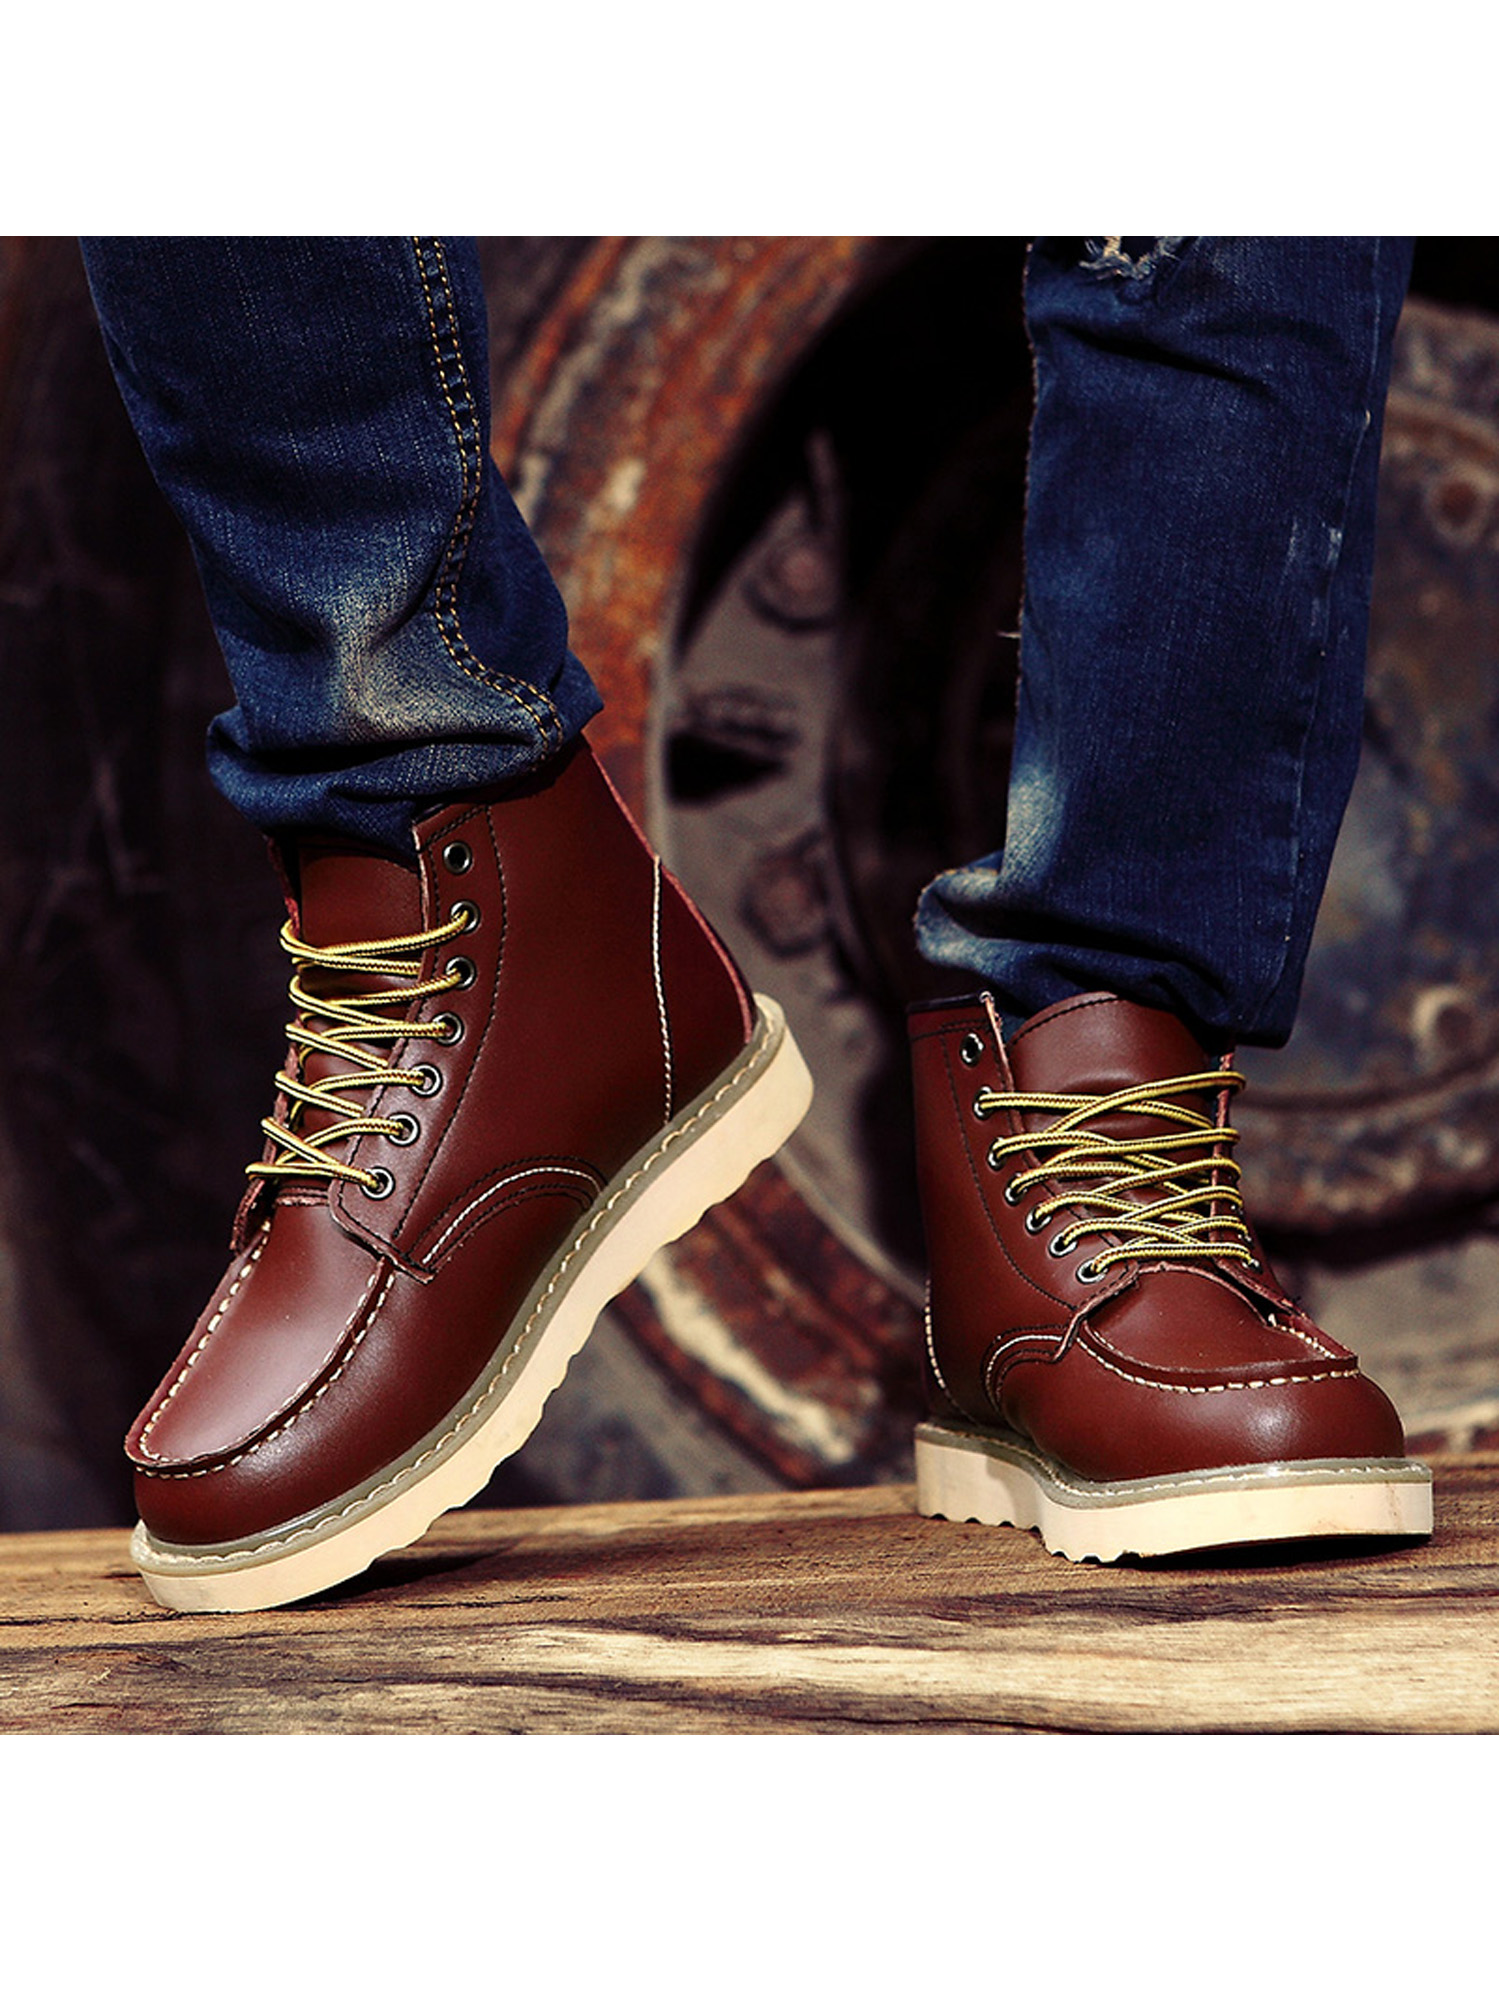 Avamo Men Leather Boots Motorcycle Shoes Boots Shoe Lace-Up Ankle Boot - image 5 of 7